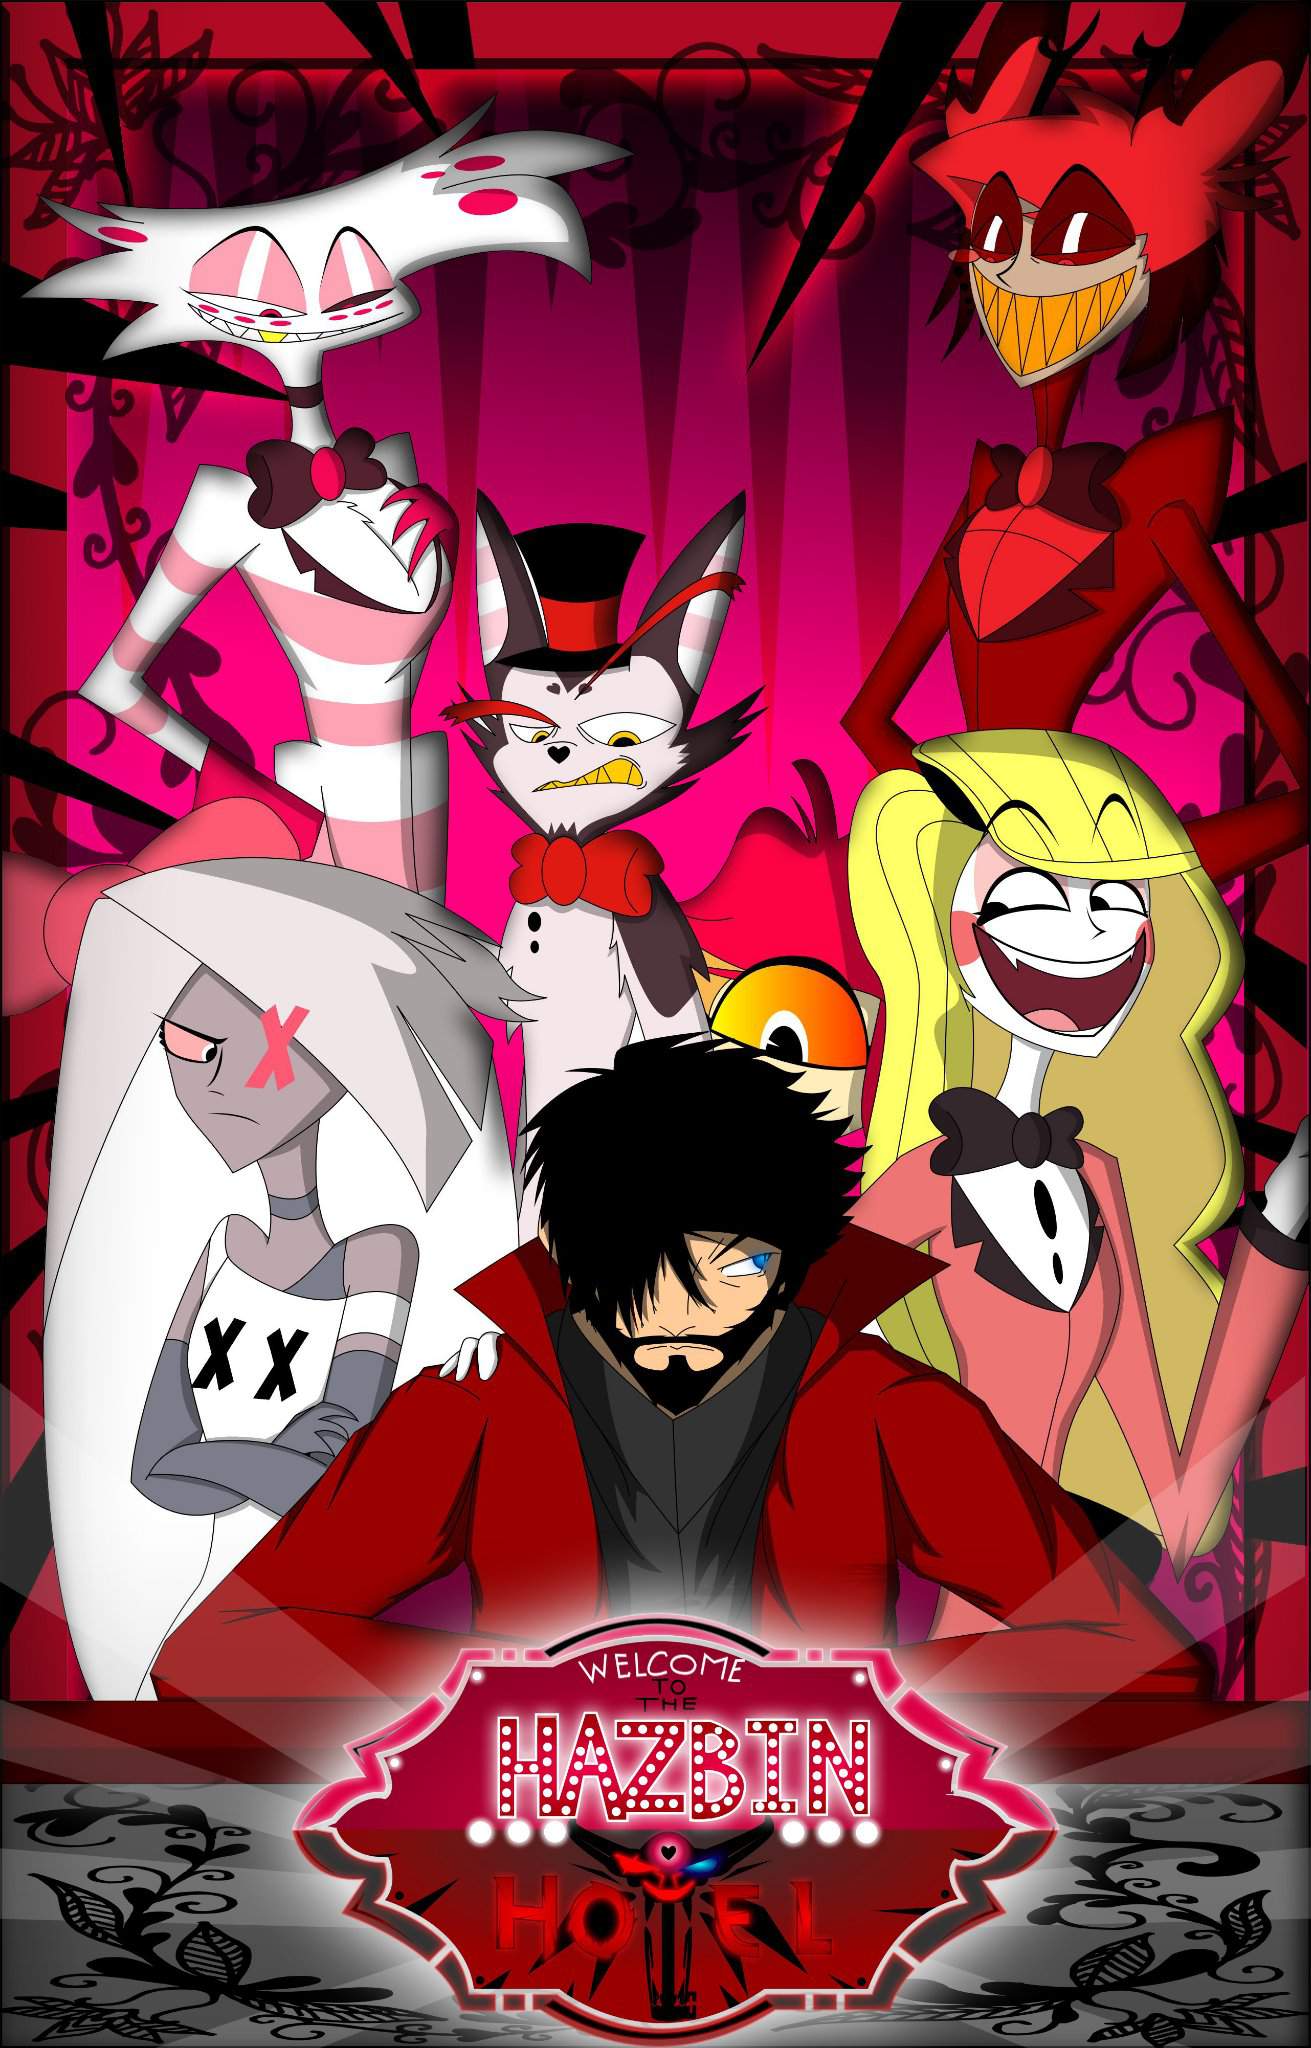 The Wandering Witcher X Hazbin Hotel Comic Crossover Announcement